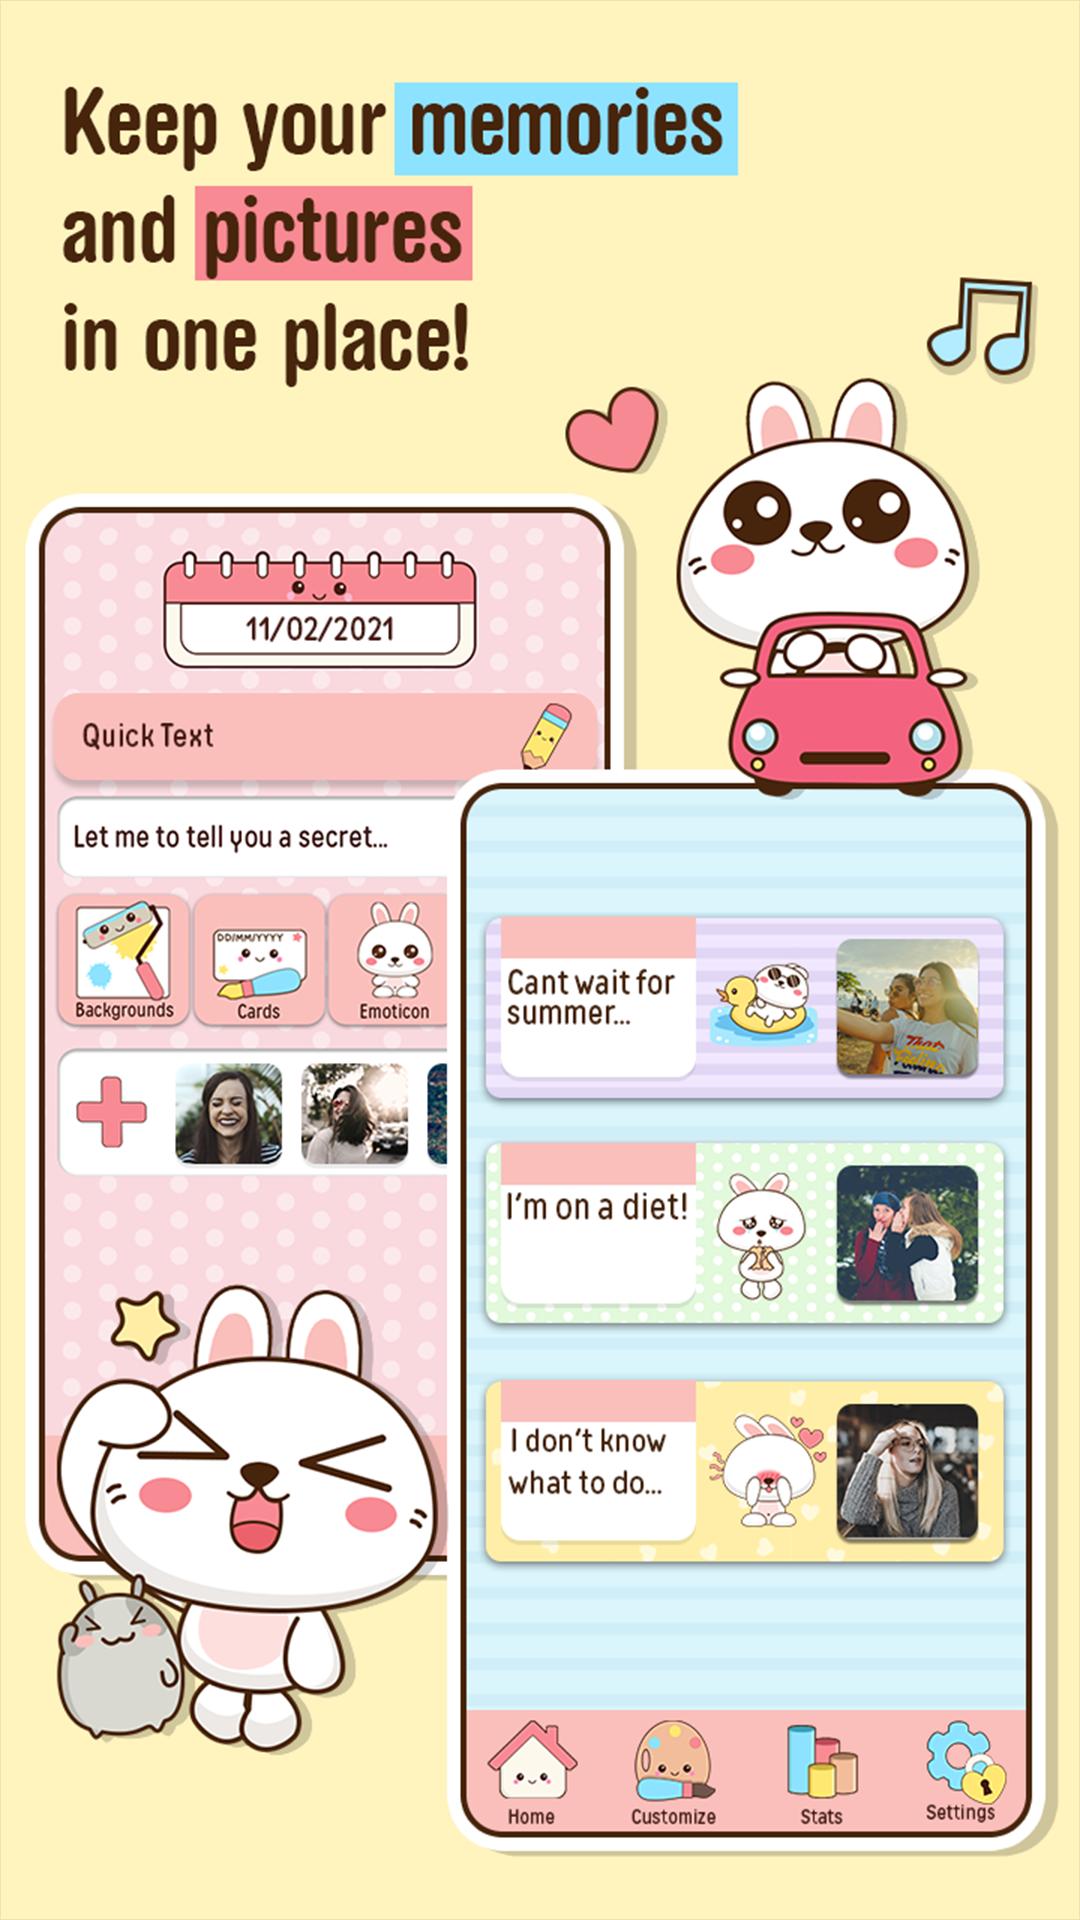 Niki: Cute Diary App for Android - APK Download